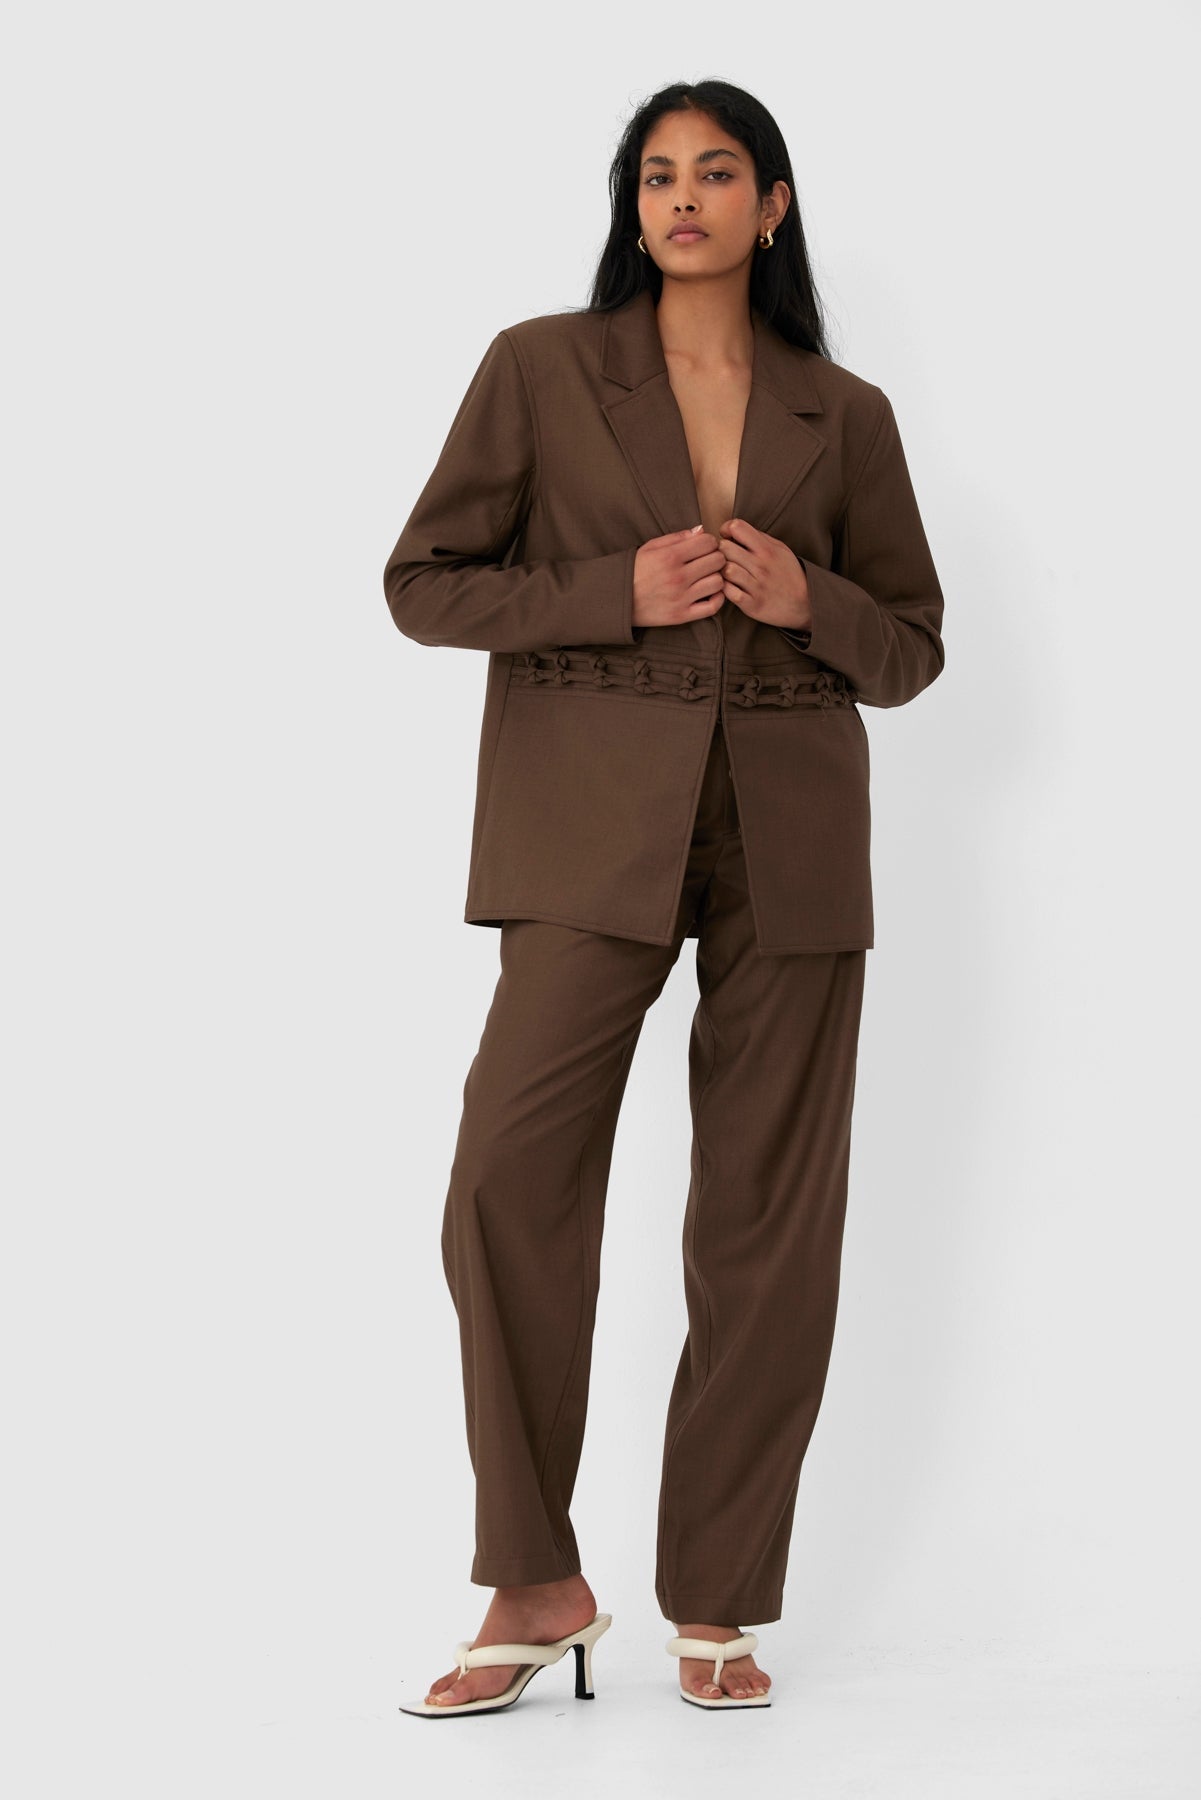 C/MEO Collective - Subtraction Pant - Brown